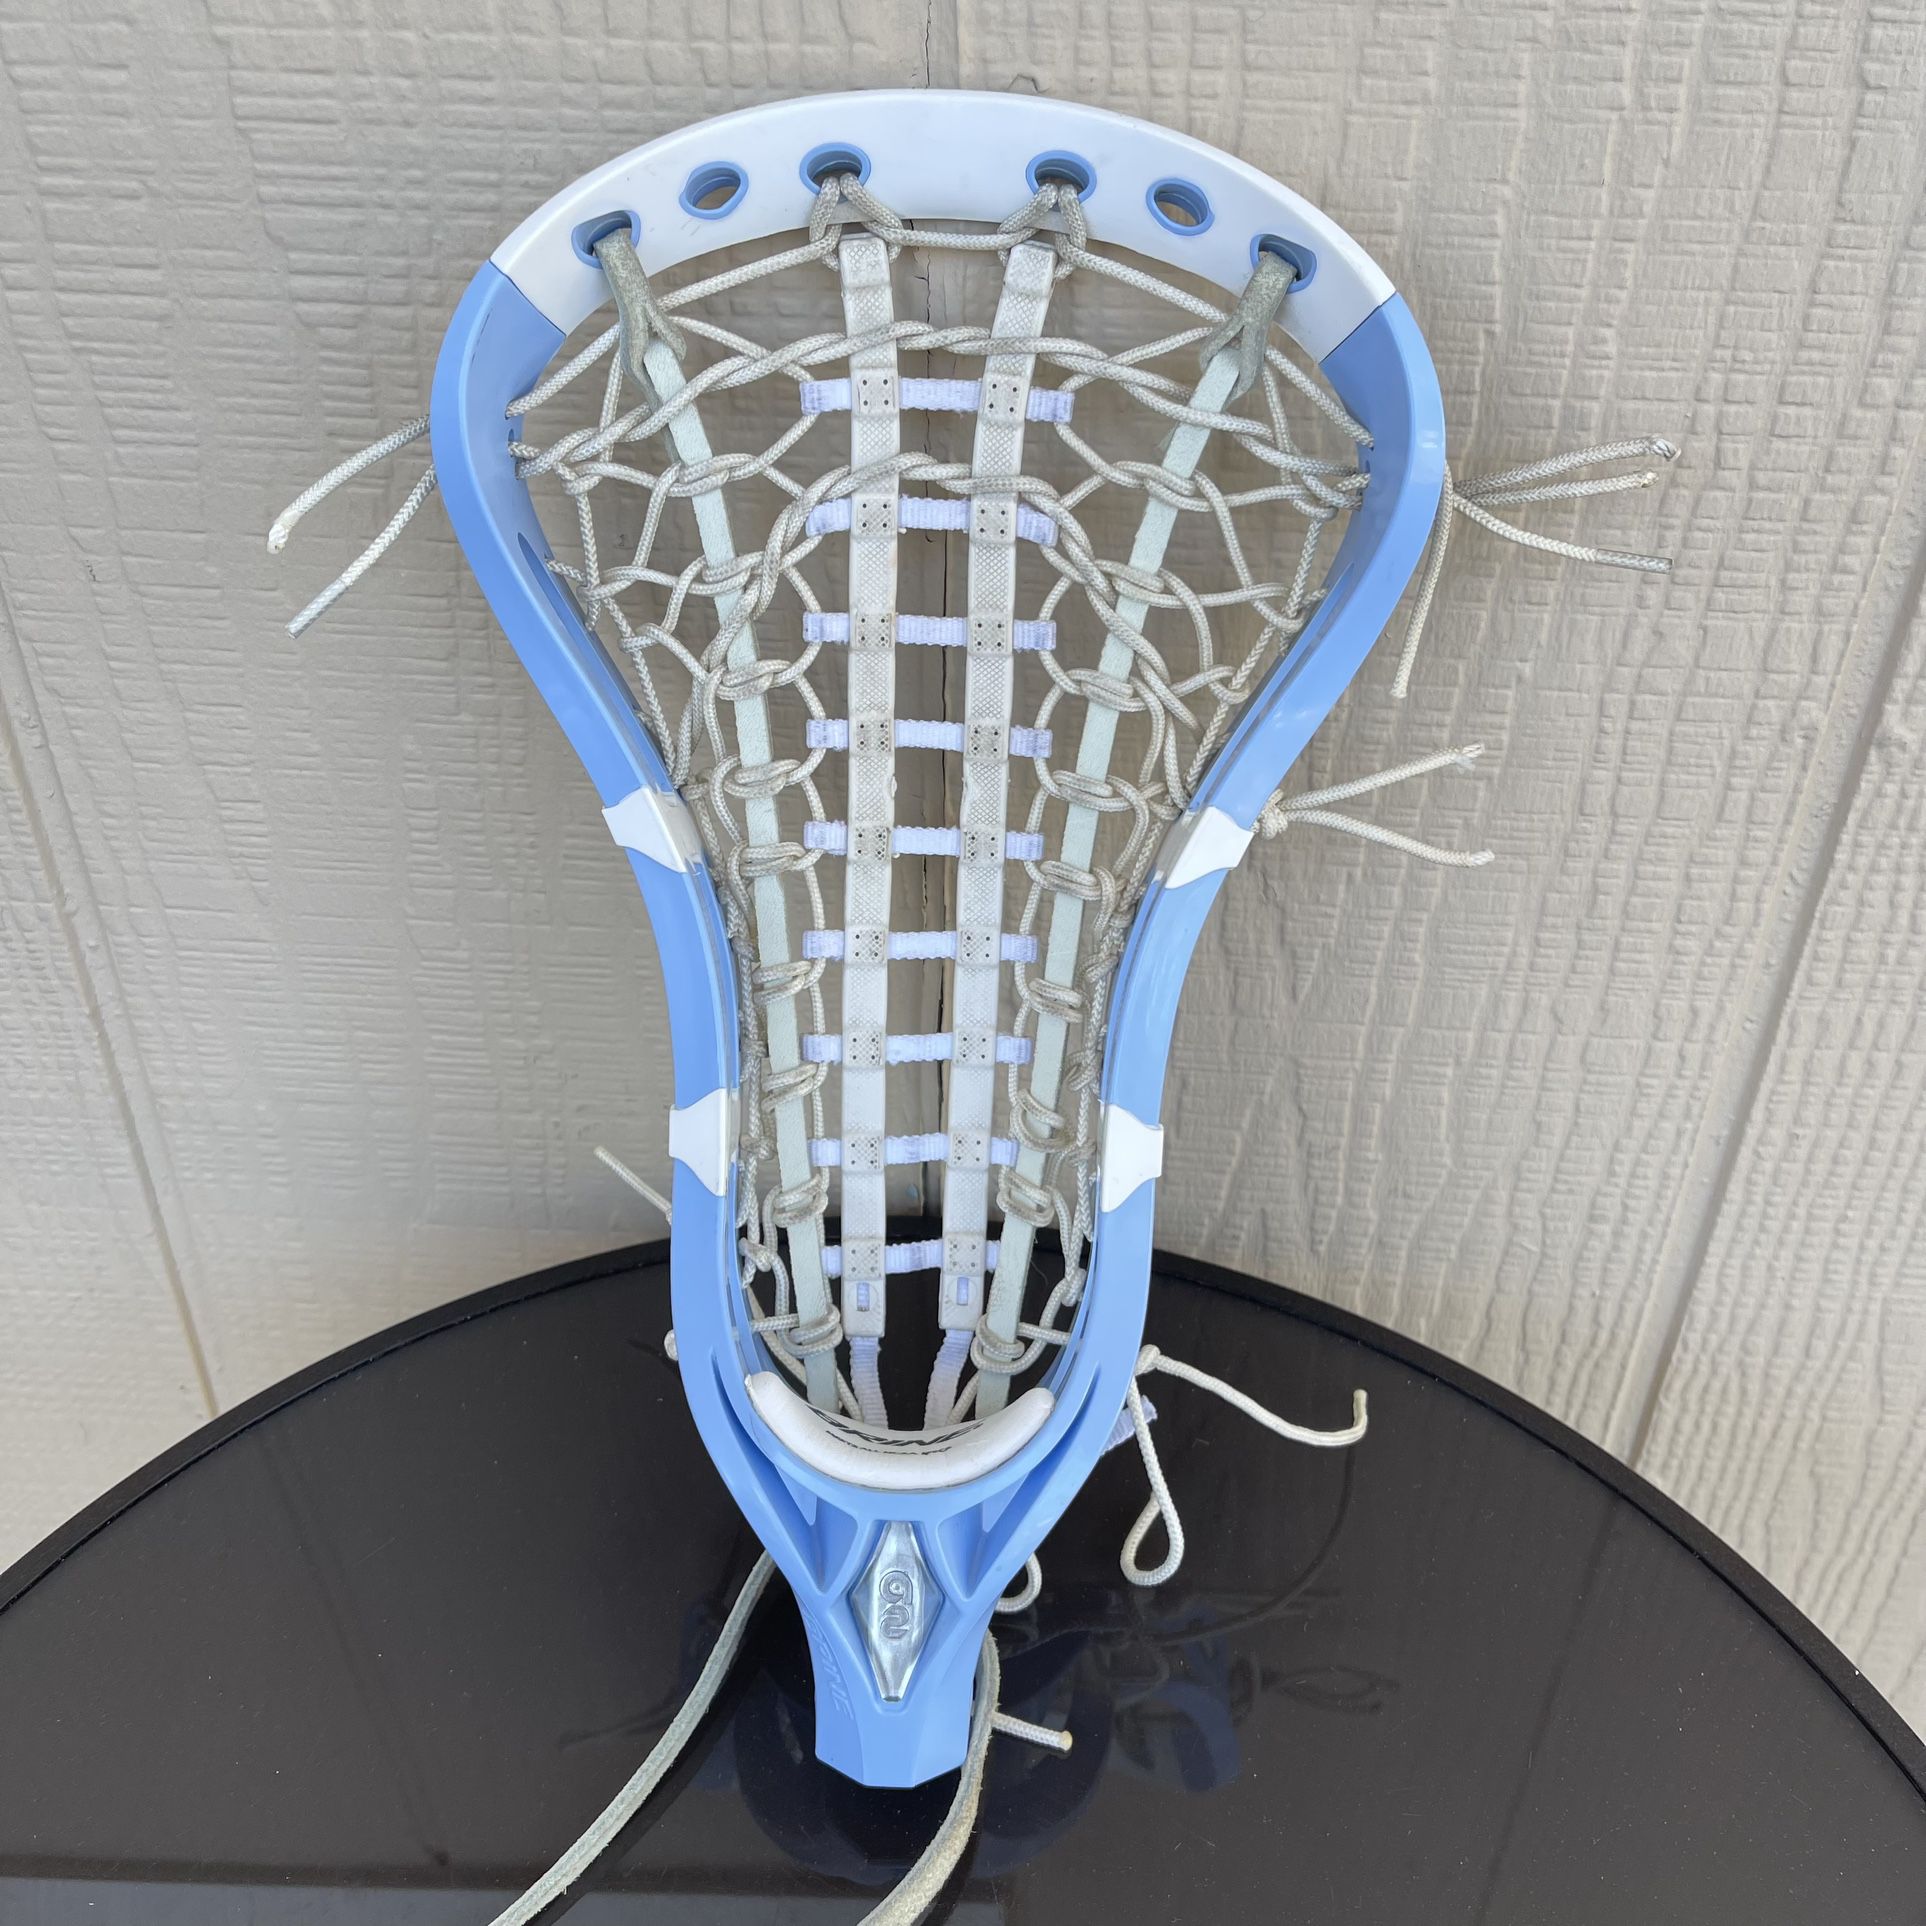 Pre- Owned Brine Lacrosse Head a2 White and Blue